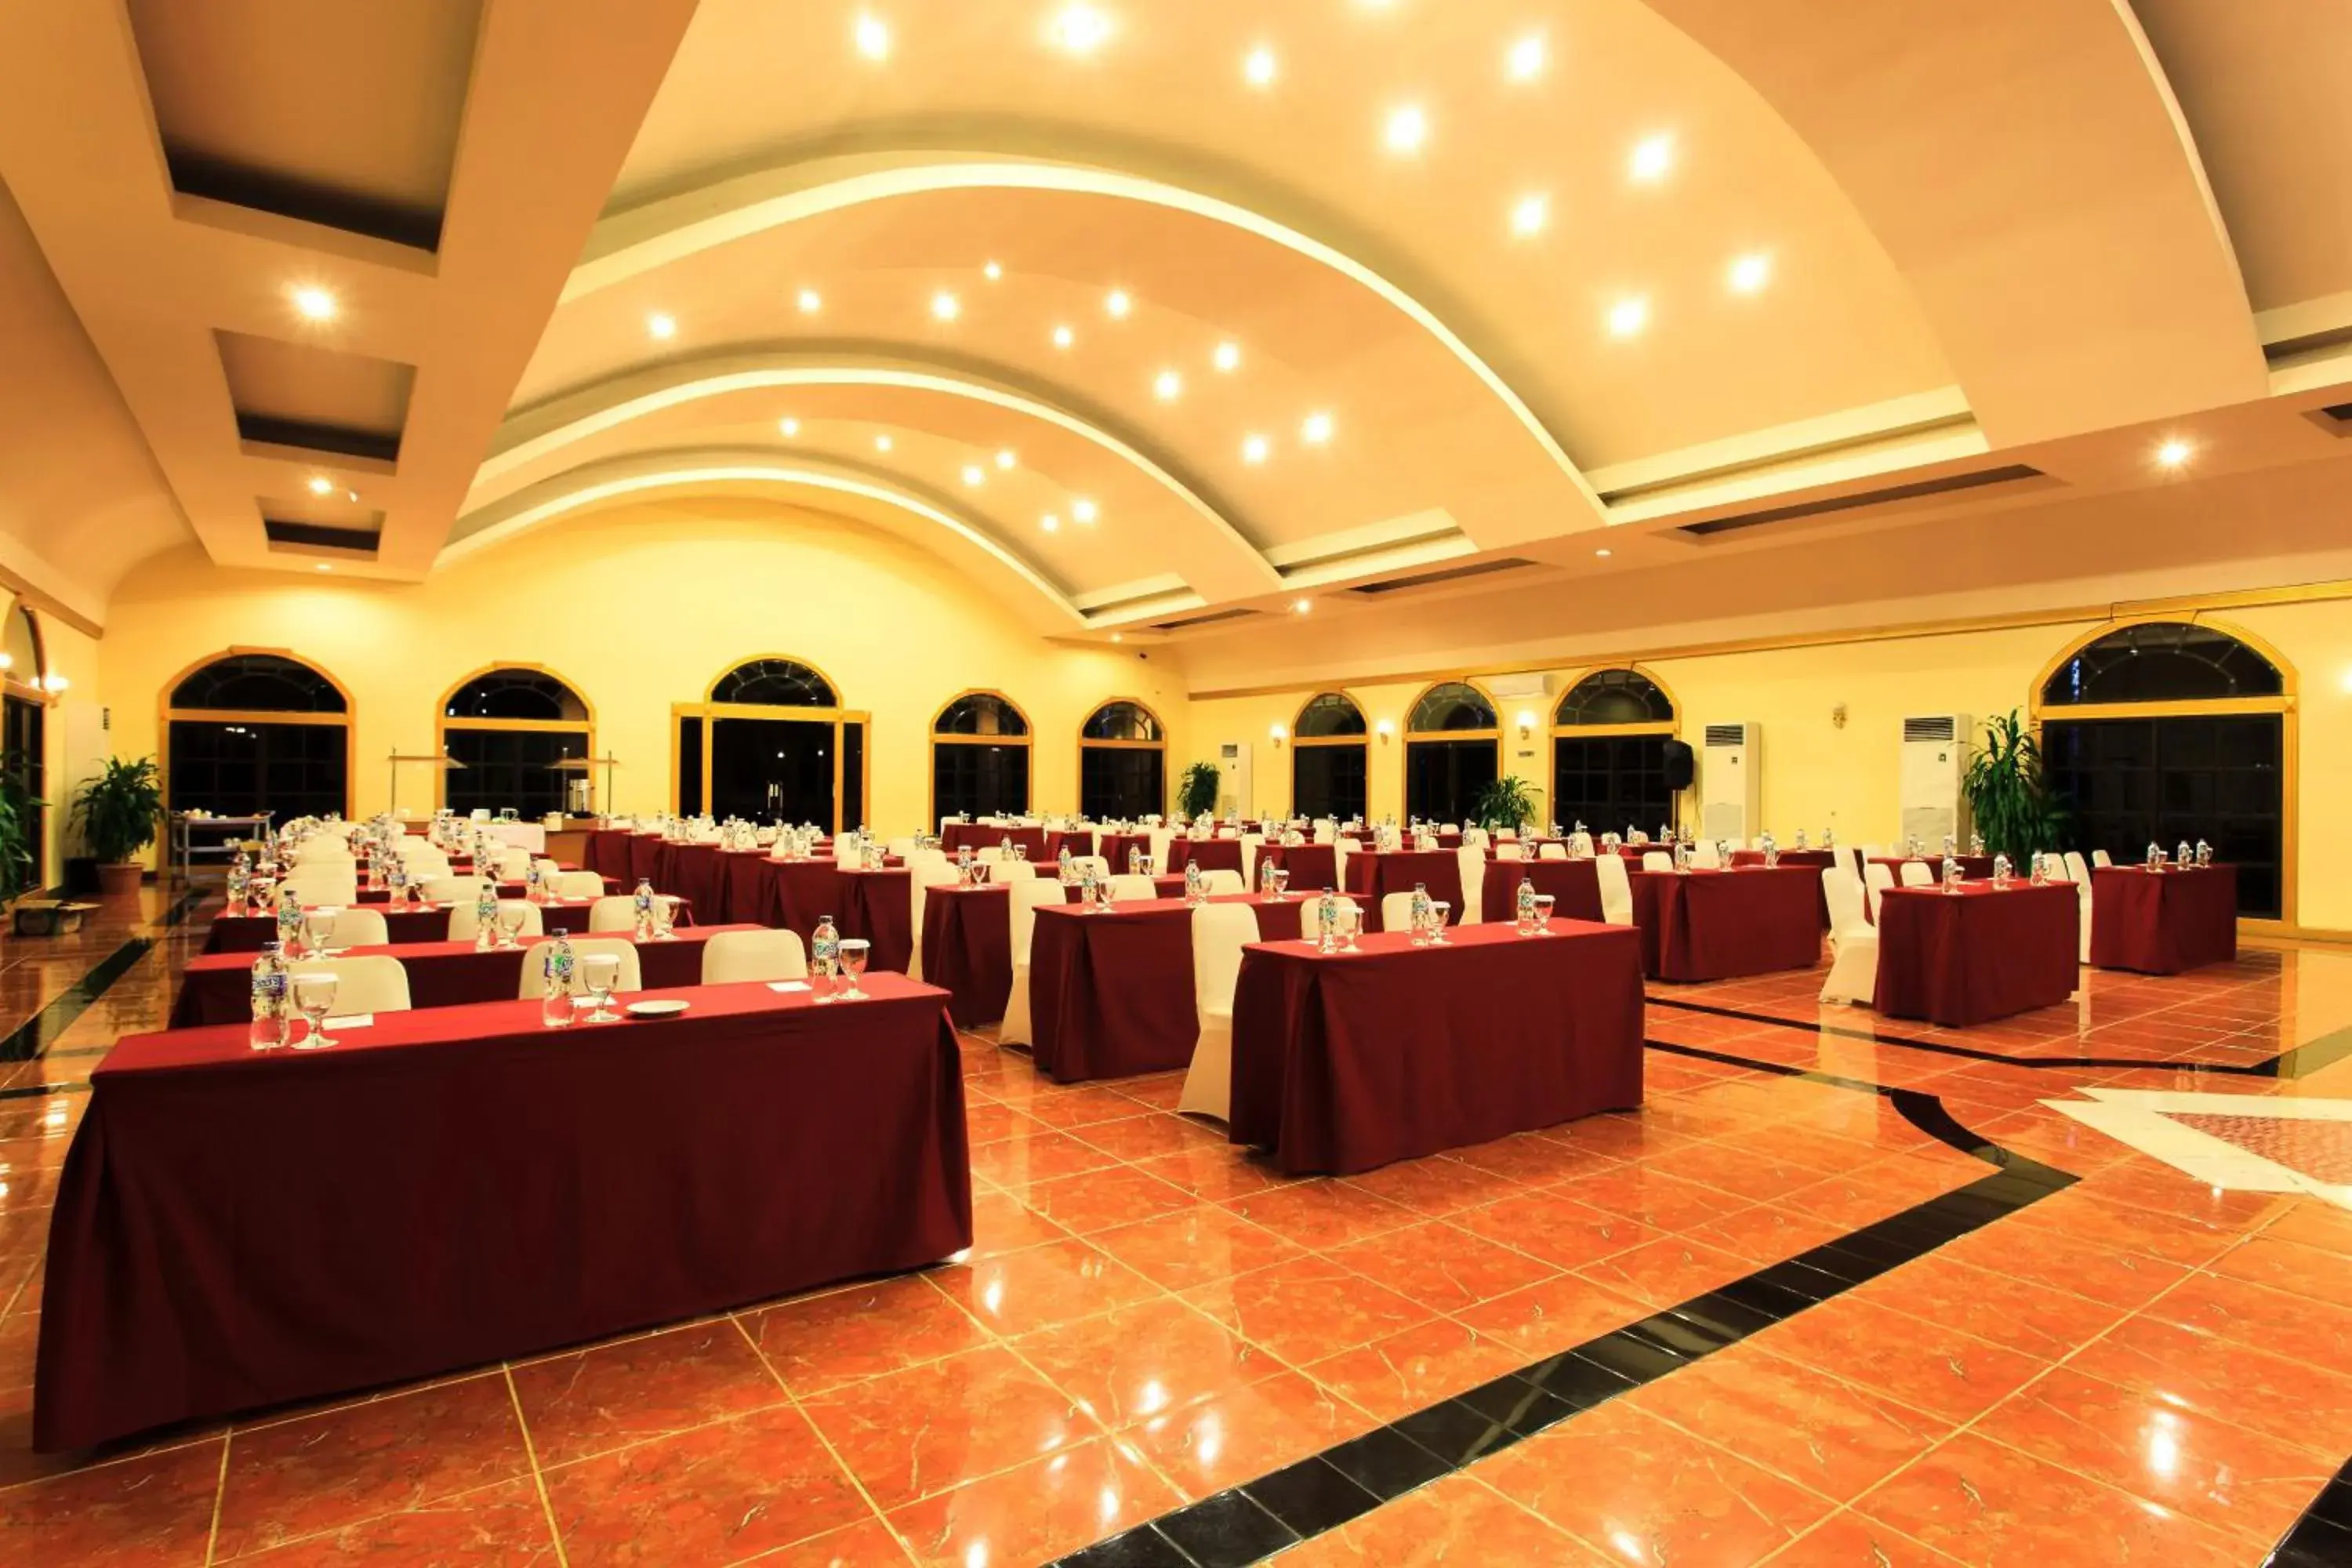 Meeting/conference room, Banquet Facilities in ASTON Niu Manokwari Hotel & Conference Center